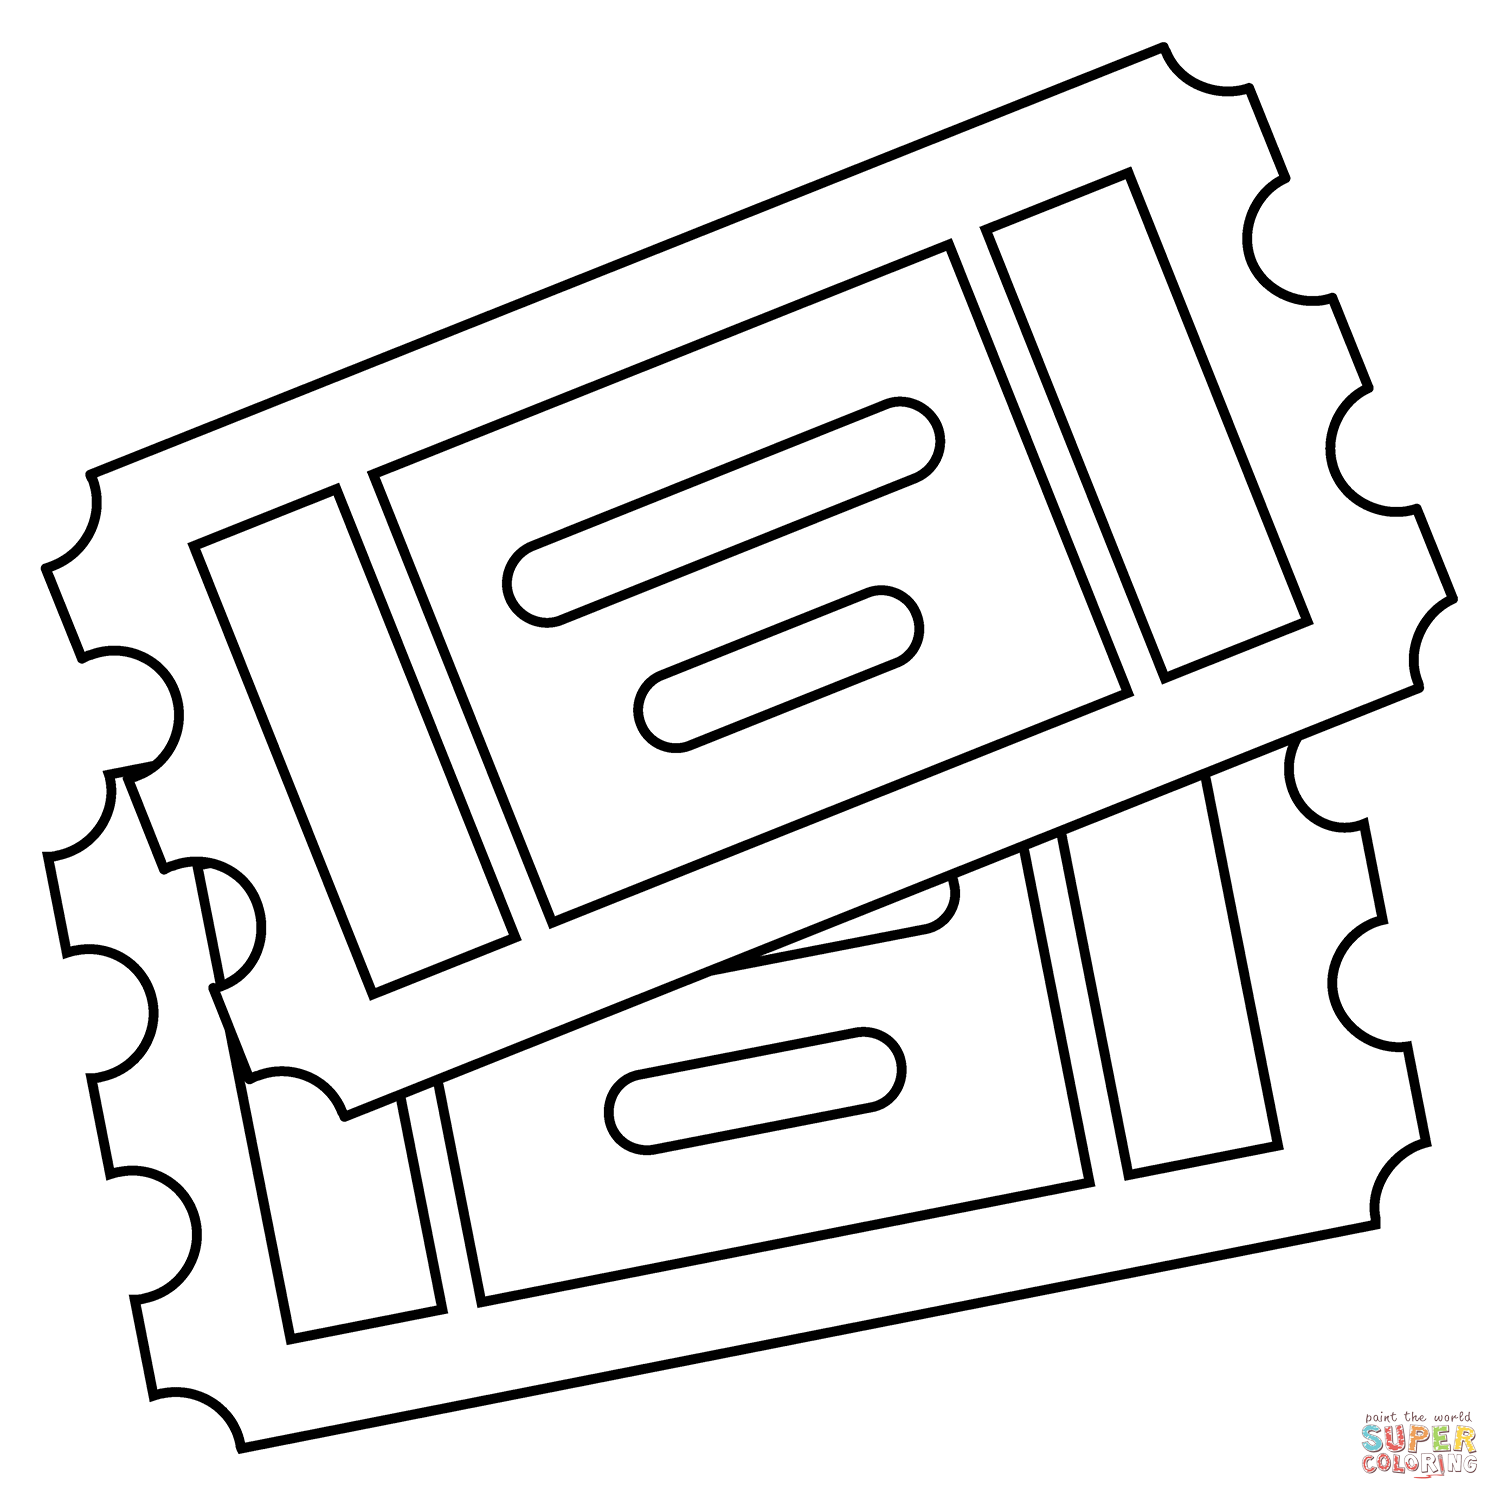 Admission Tickets Emoji coloring page | Free Printable Coloring Pages